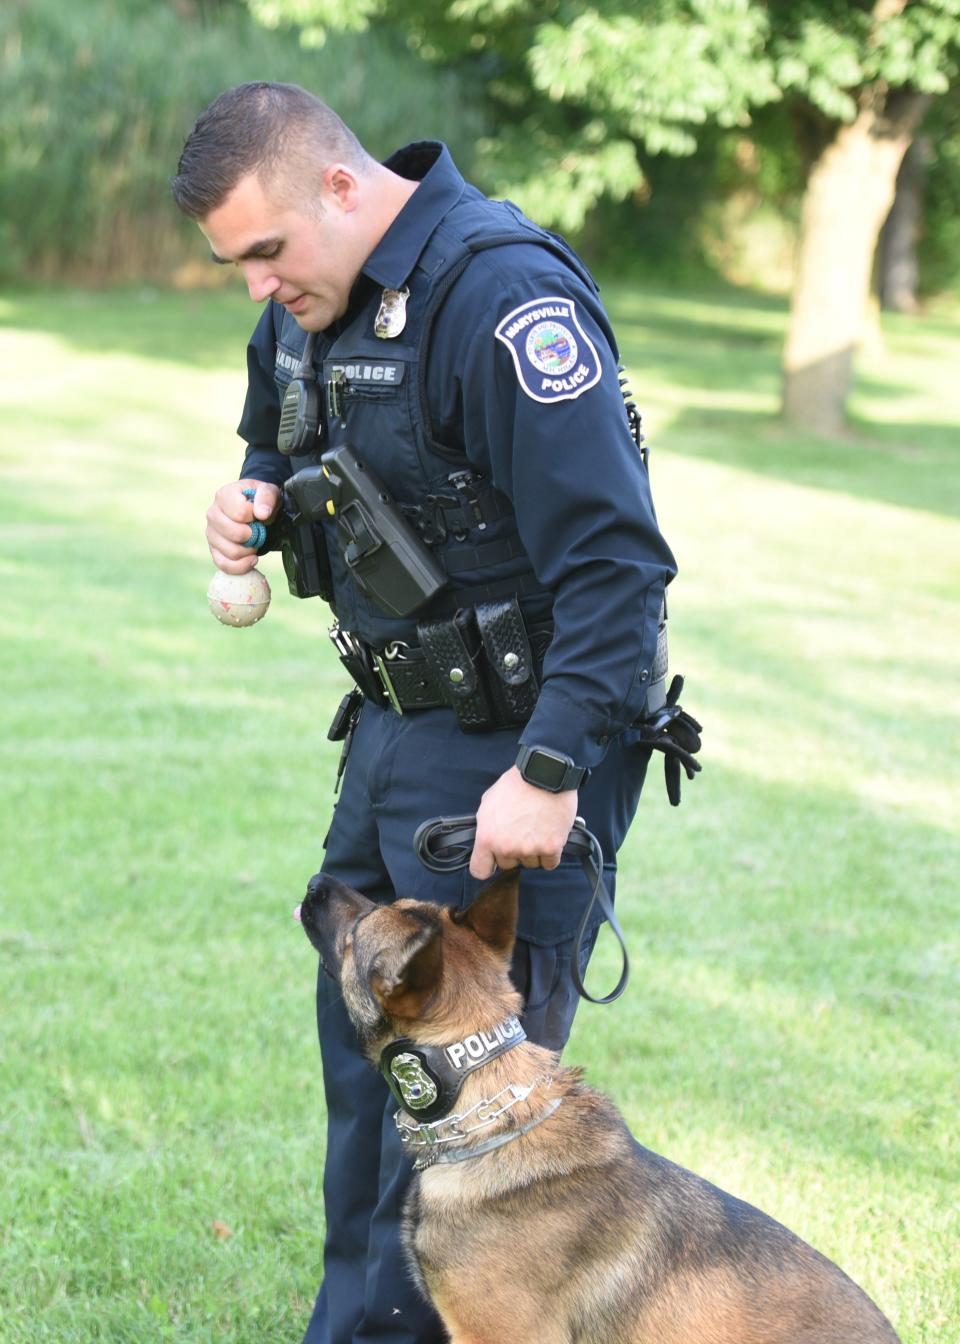 Marysville Police Officer Travis Baldwin works with Zeva on obedience training. She has to sit before she can have the ball.